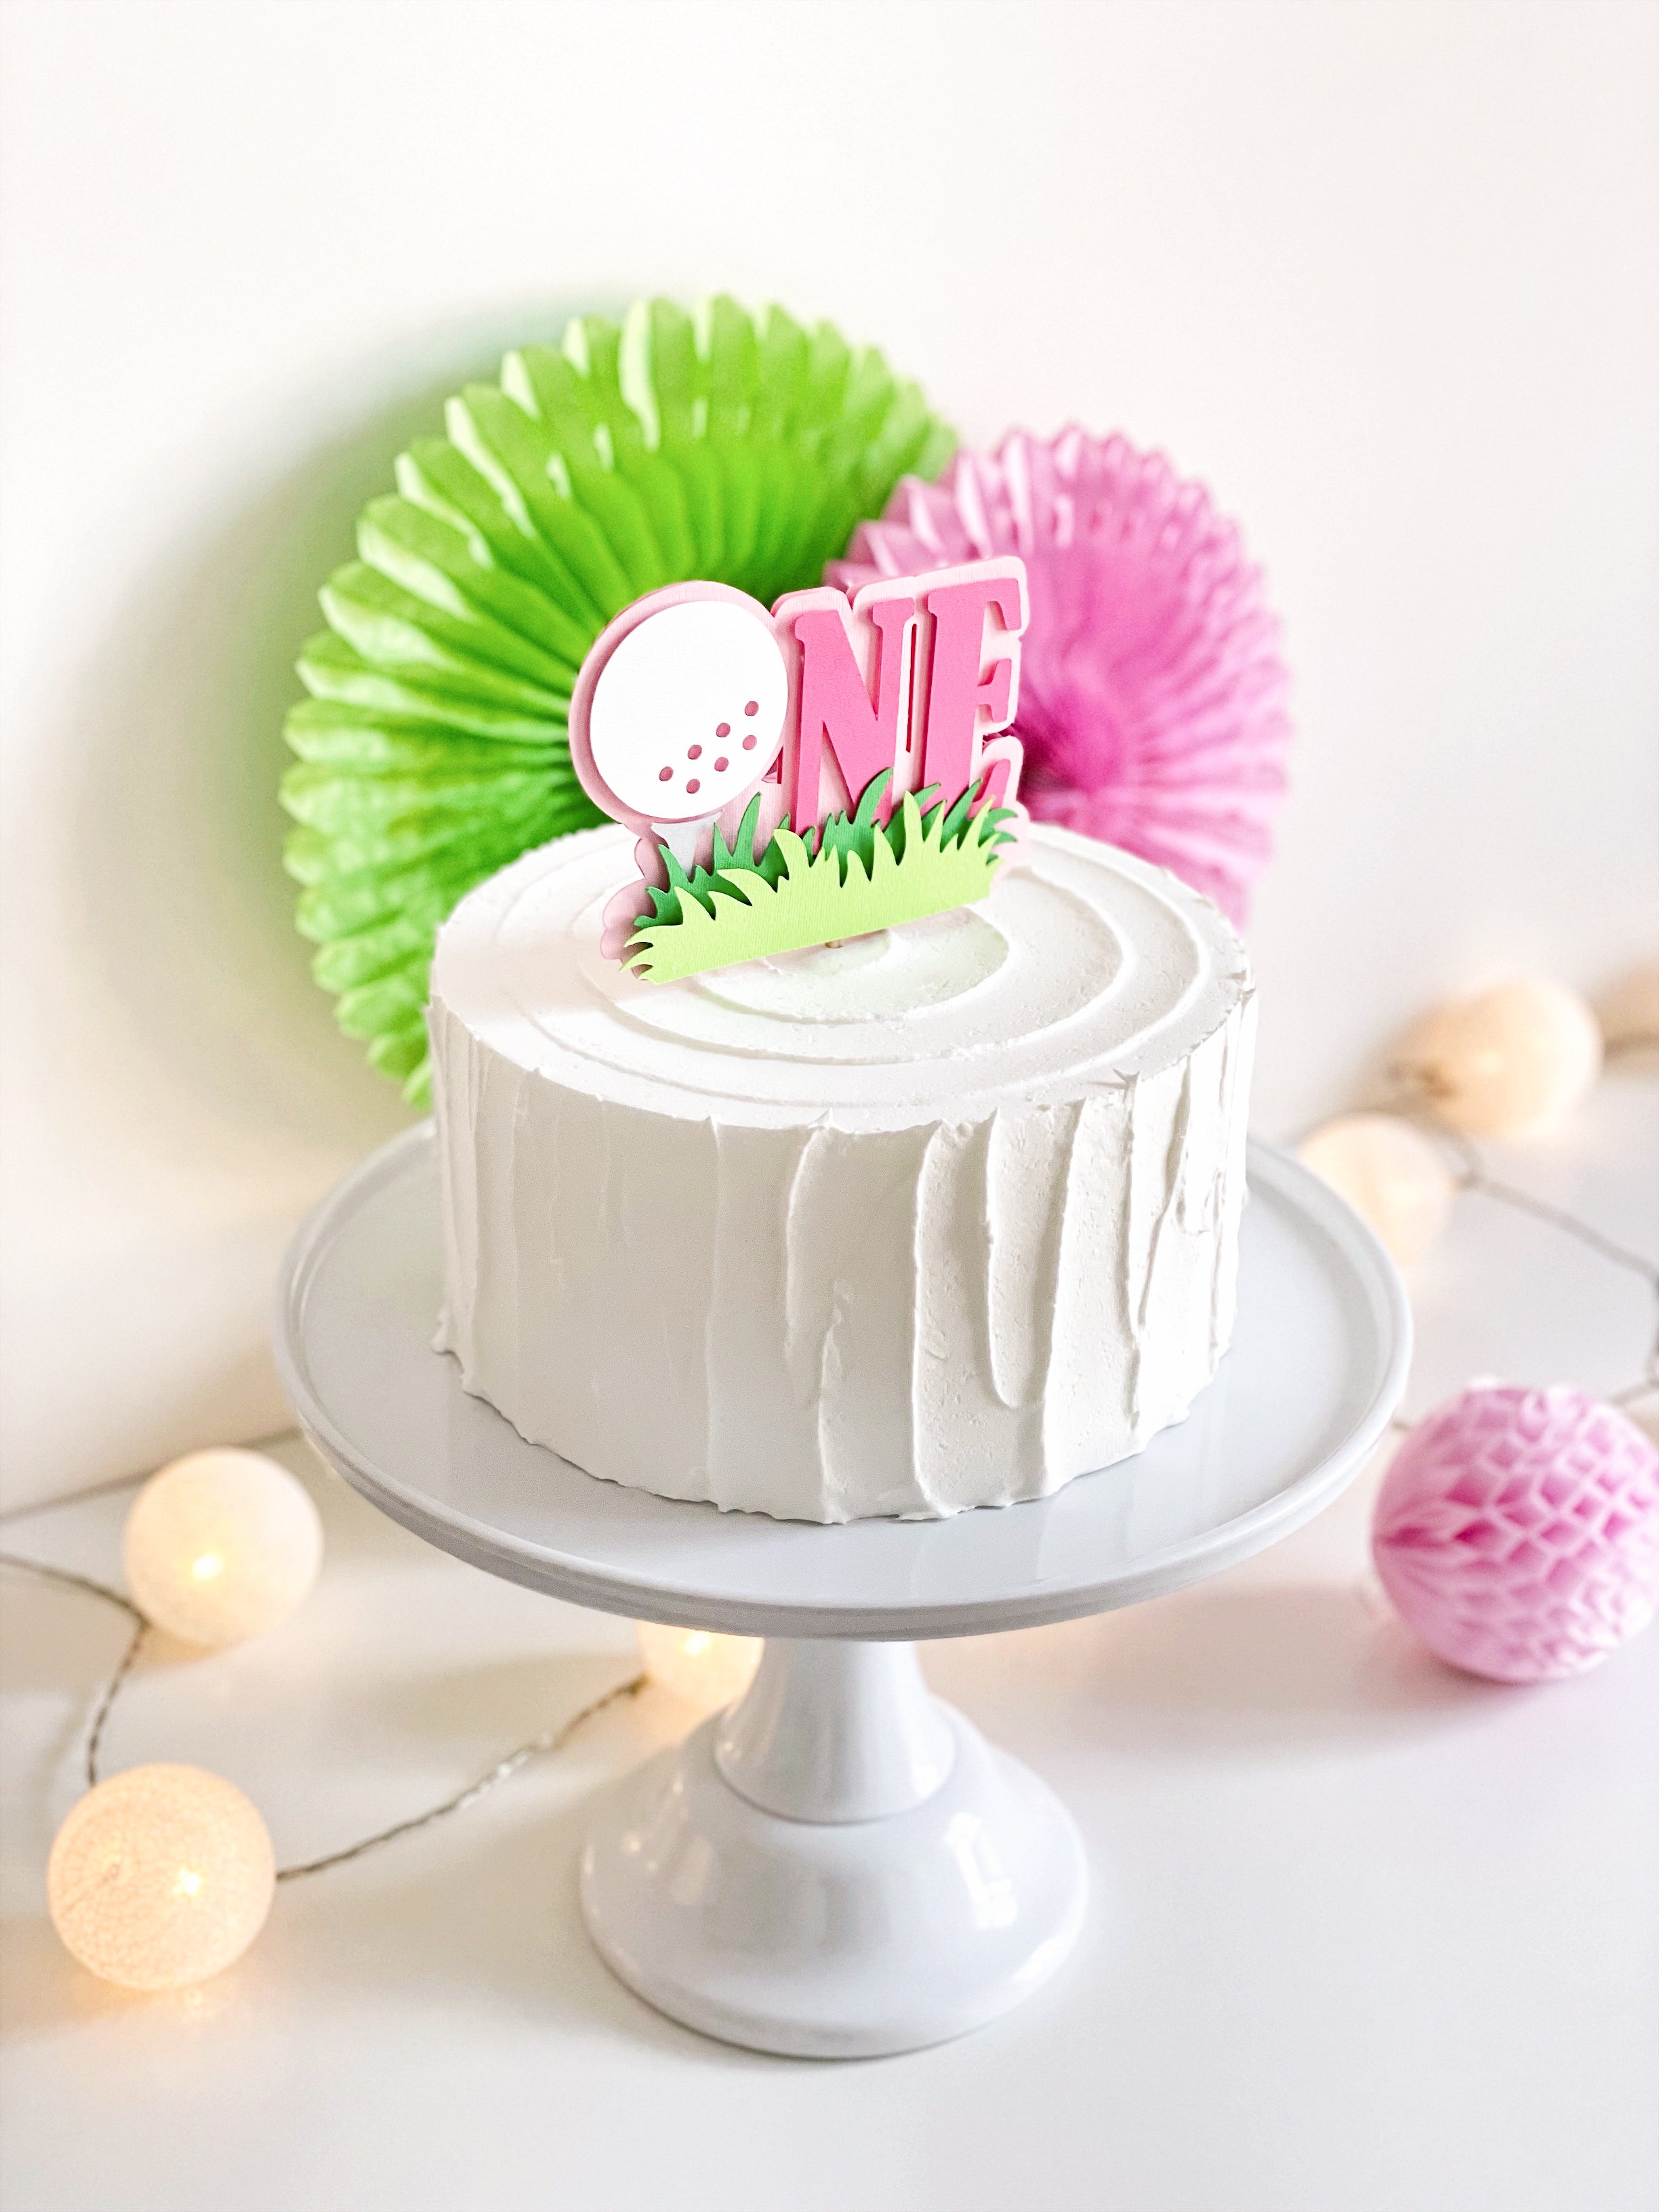 Girl Hole in One First Birthday Cake Topper Girl Golf First Birthday Decor Golfing Party Ides Let's Par-tee Our Little All Star Birthday